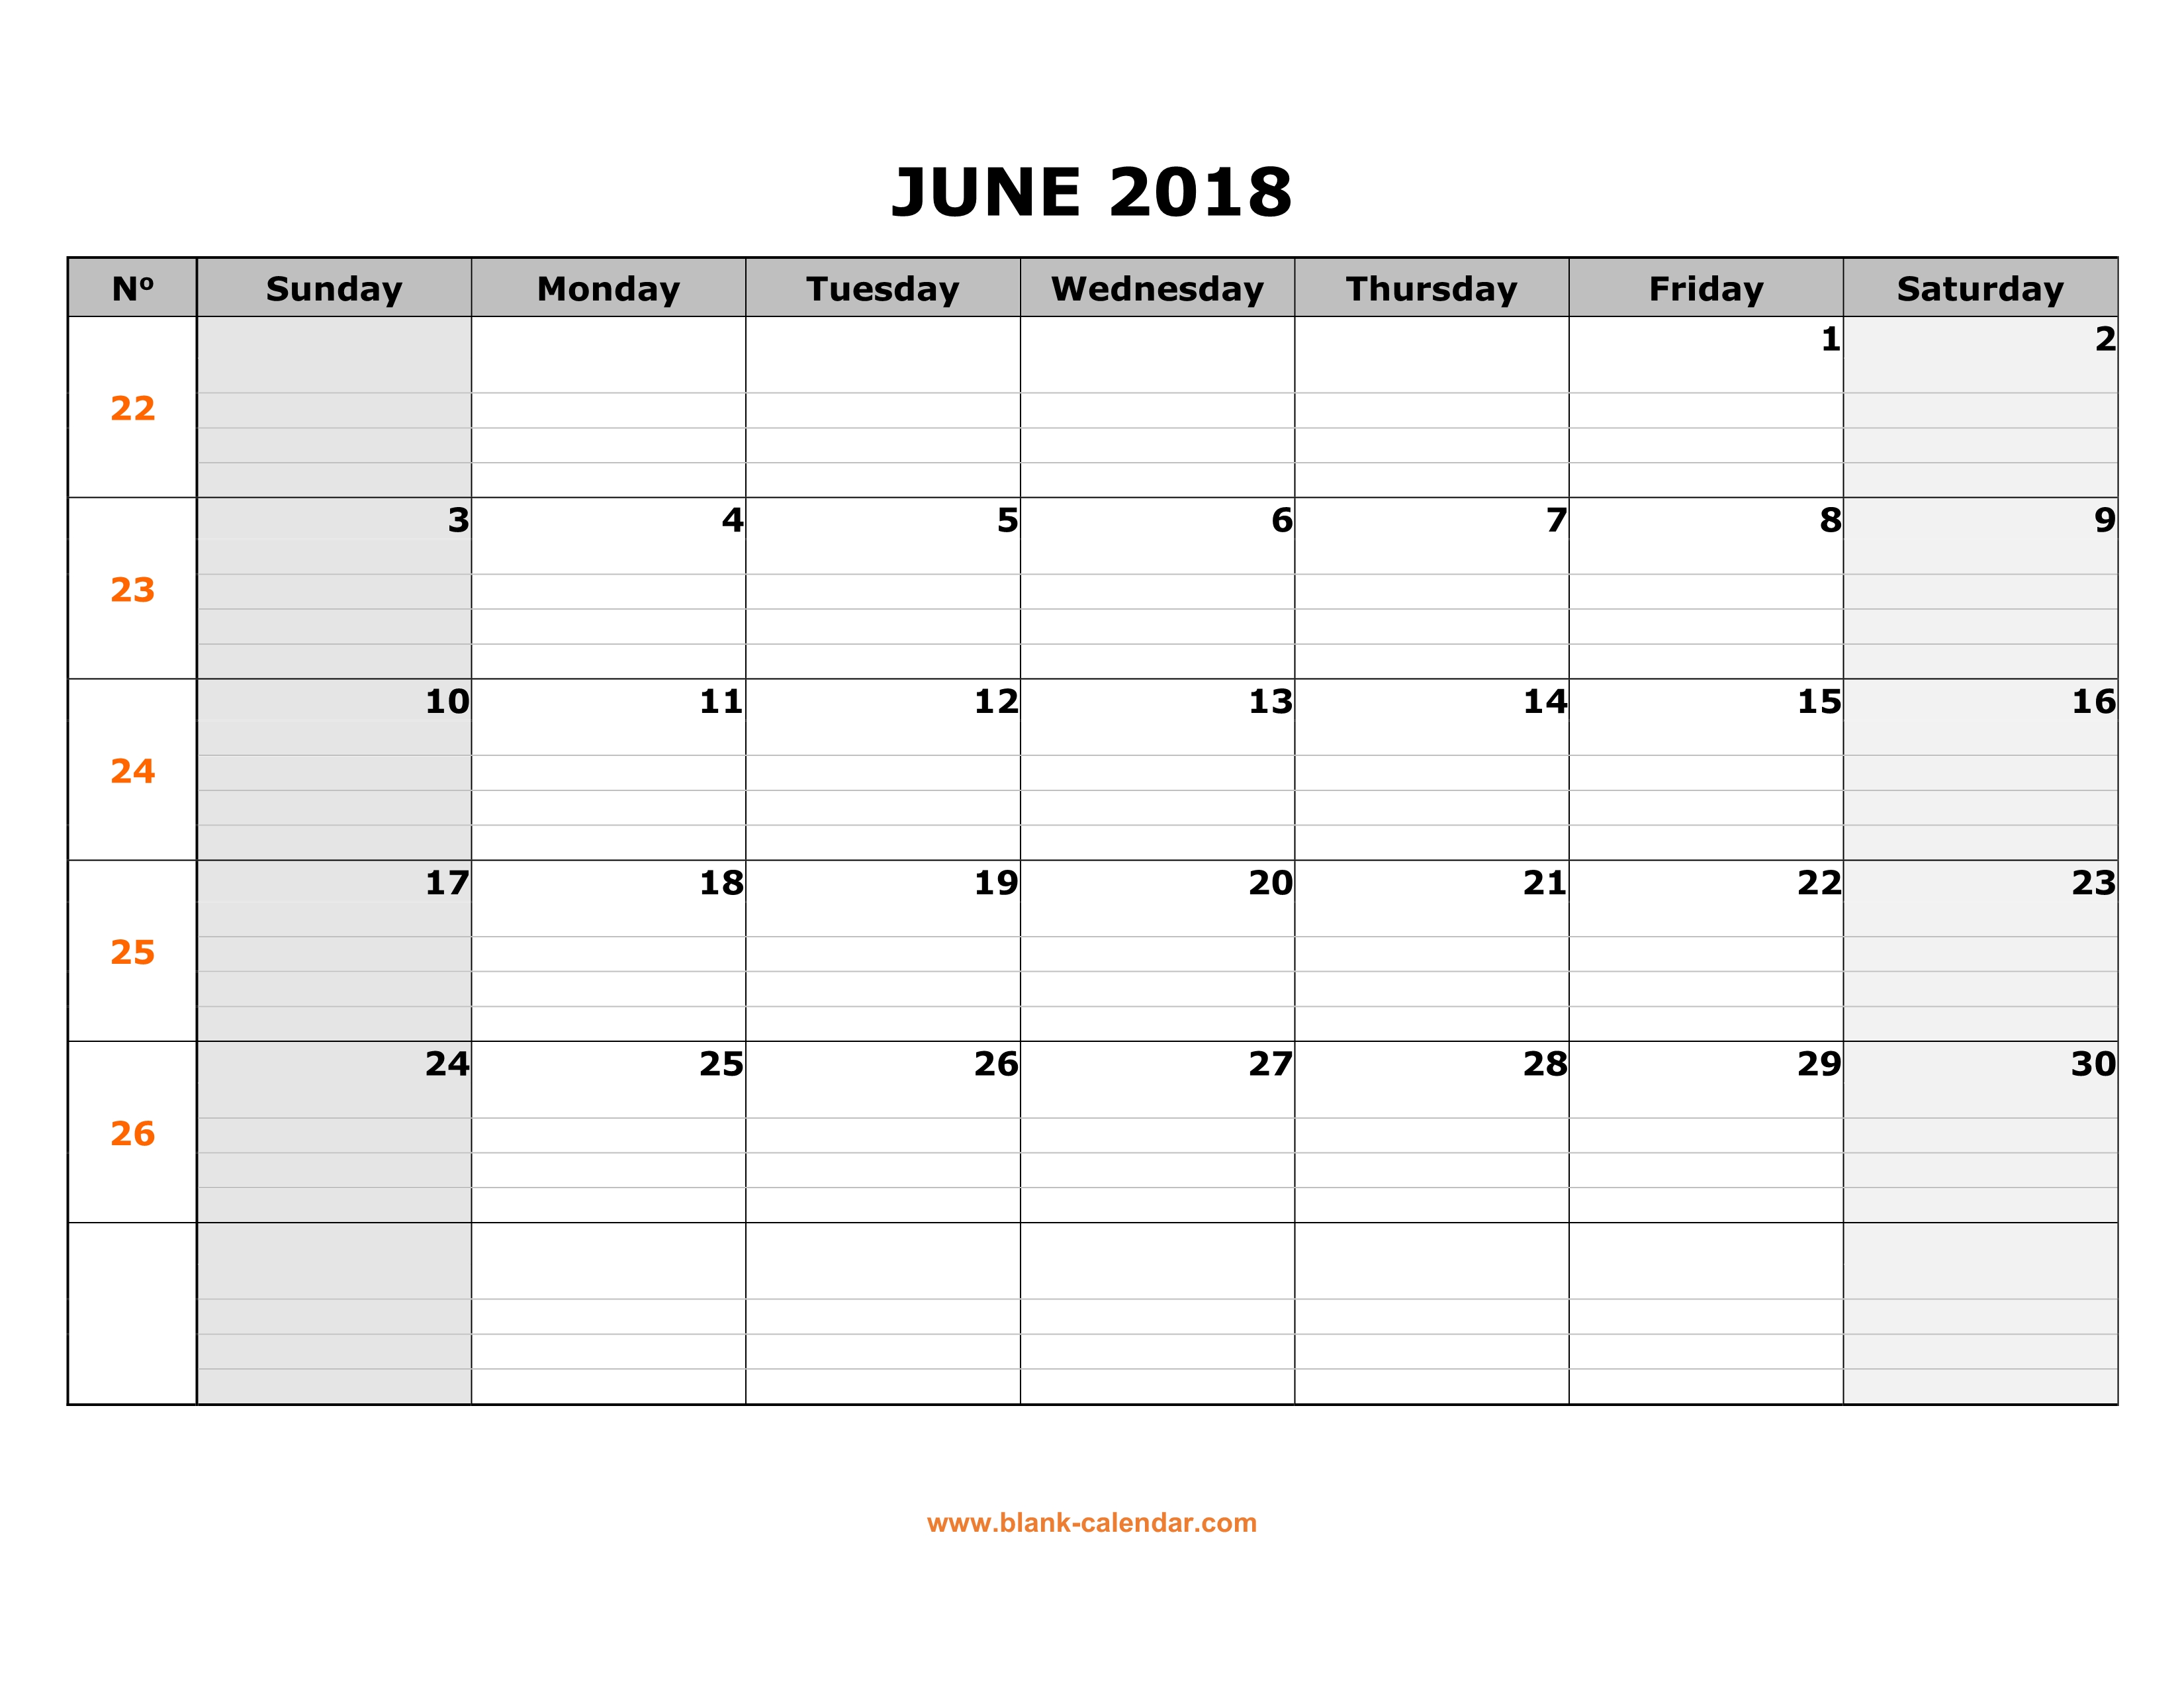 Free Download Printable June 2018 Calendar Large Box Grid Space For Notes